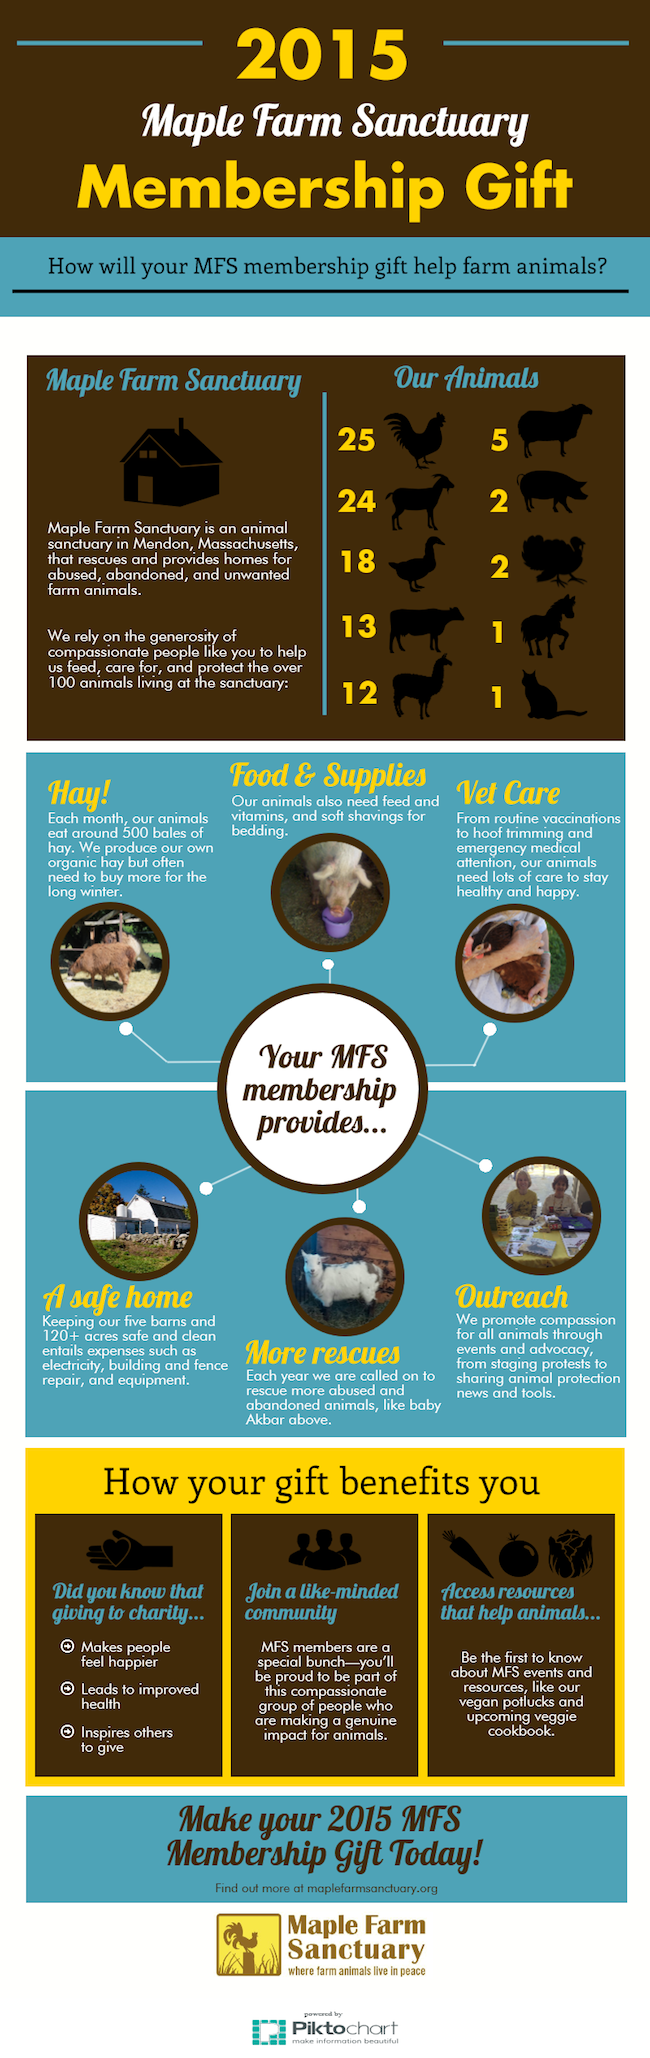 See how your 2015 MFS membership gift will make a direct impact for animals, now and in the future.